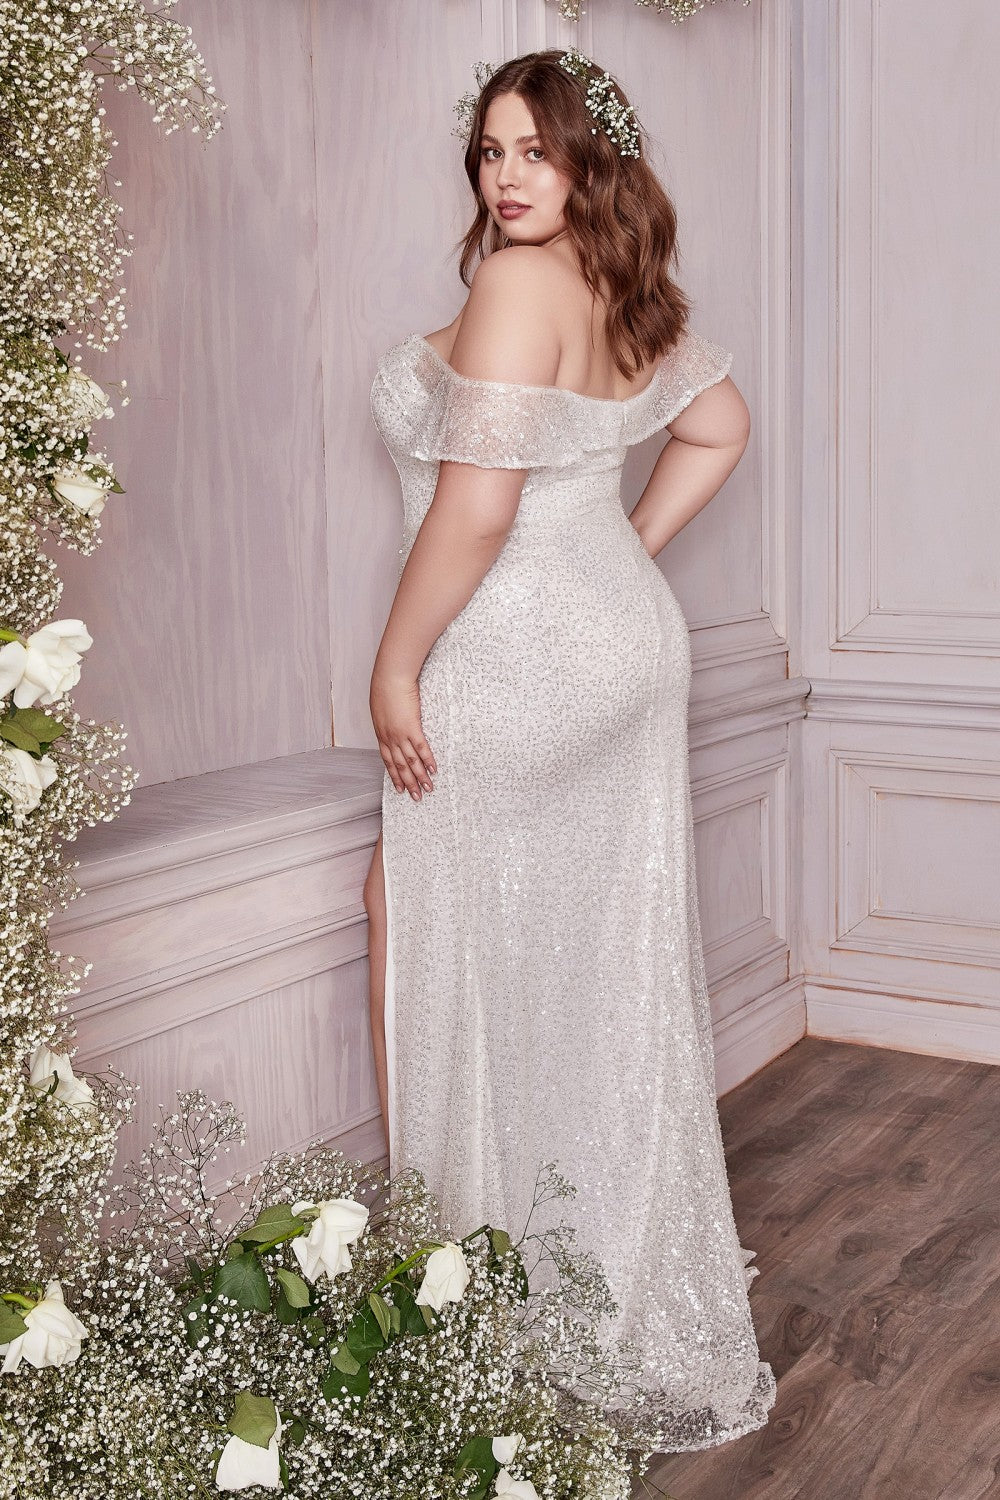 Off Shoulder Sequin Wedding & Bride Gown Fitted Bodice with Deep Illusion Neckline Sensual Bride Gown Playful High Leg Slit CDCH167W Elsy Style Wedding Dresses